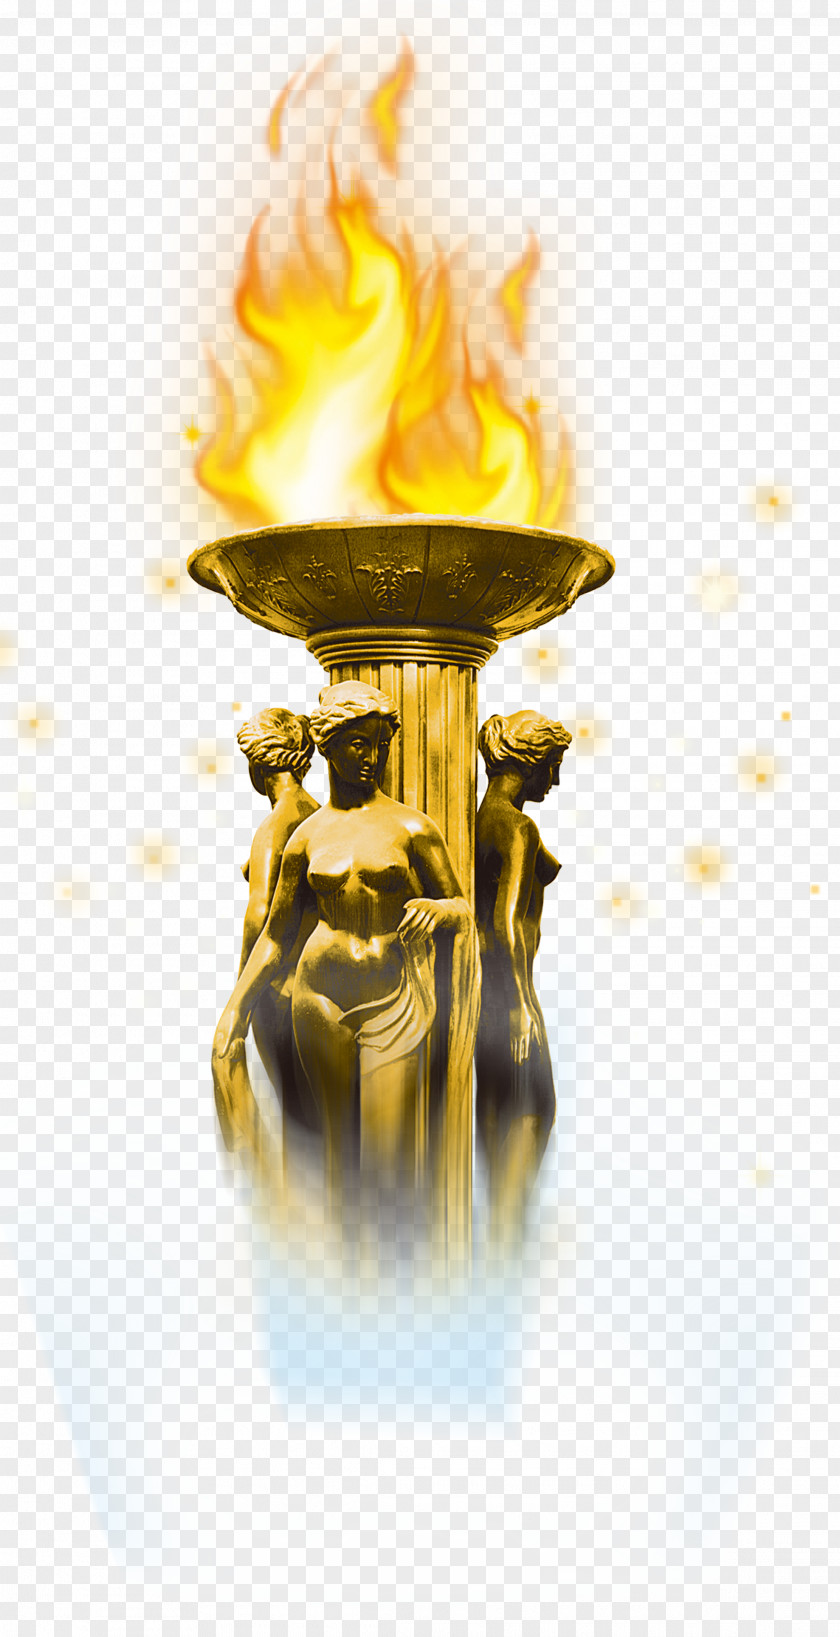 Fiery Torch Carbon Flame Sculpture Fire PNG